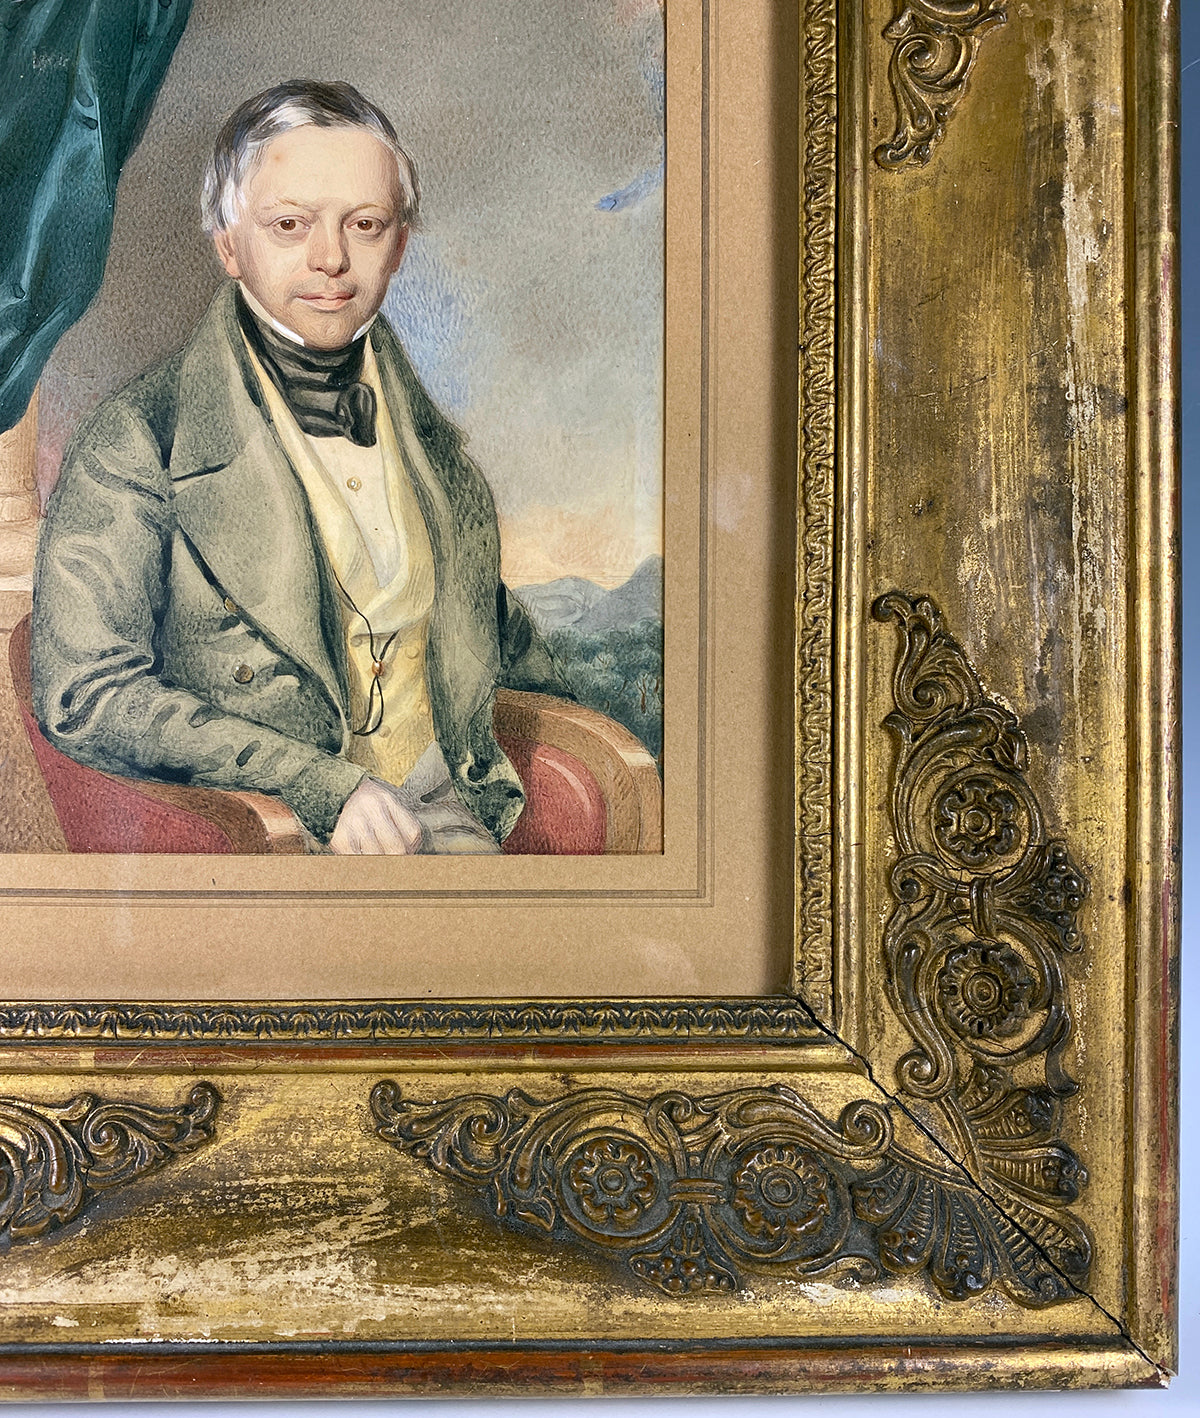 Antique French Portrait of a Dignitary, c.1810-25 Applique Empire Frame, Exceptional!